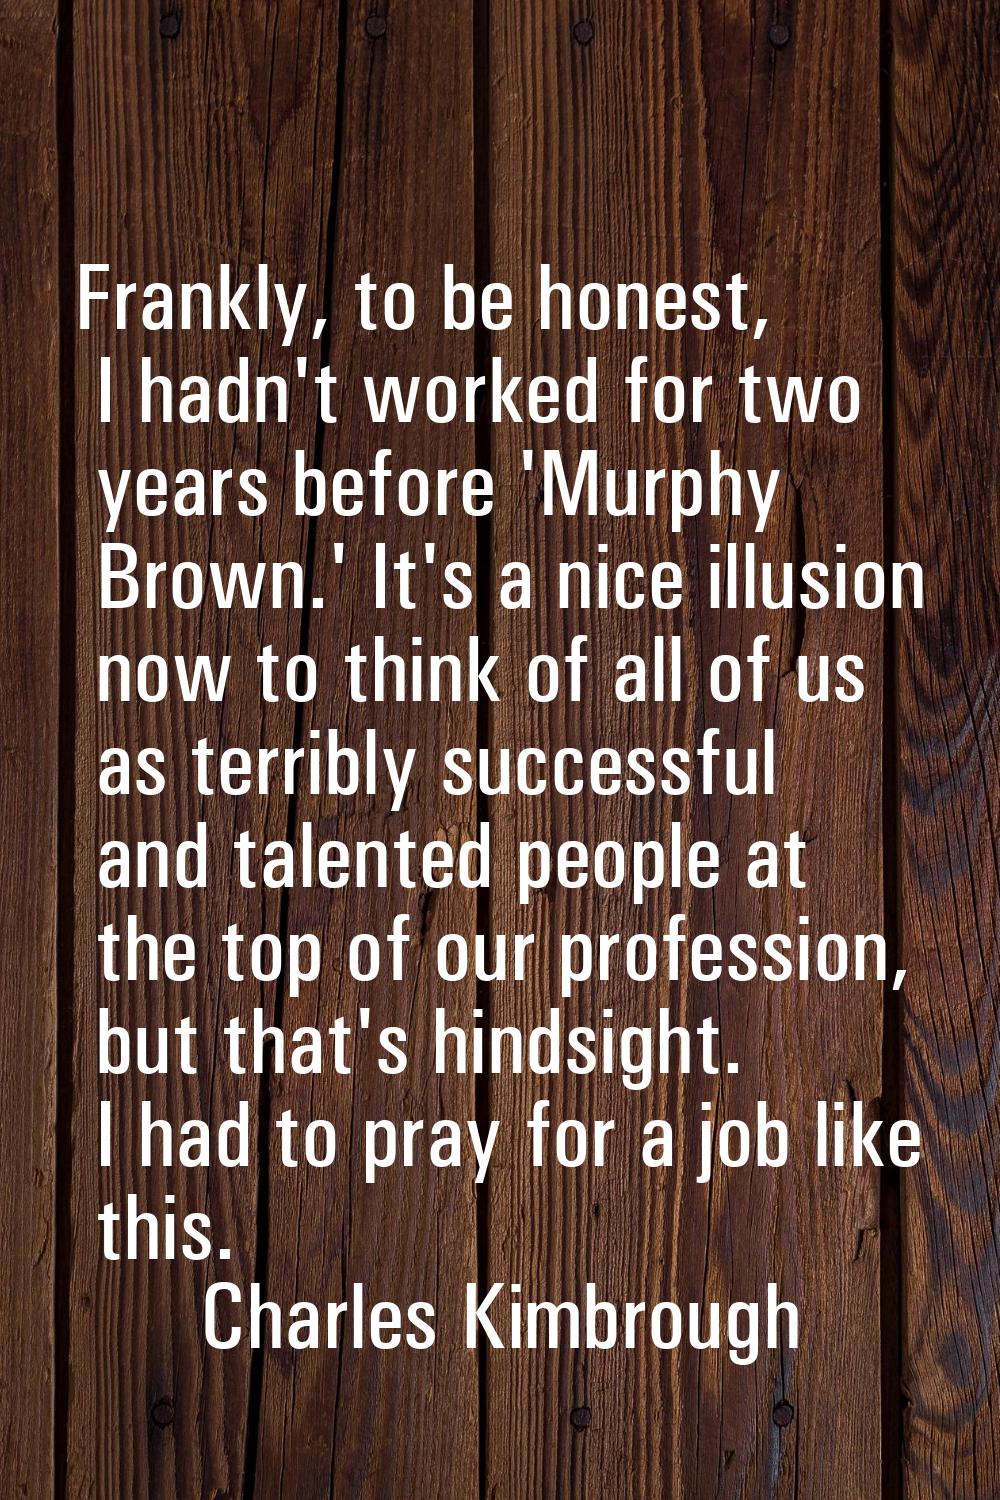 Frankly, to be honest, I hadn't worked for two years before 'Murphy Brown.' It's a nice illusion no